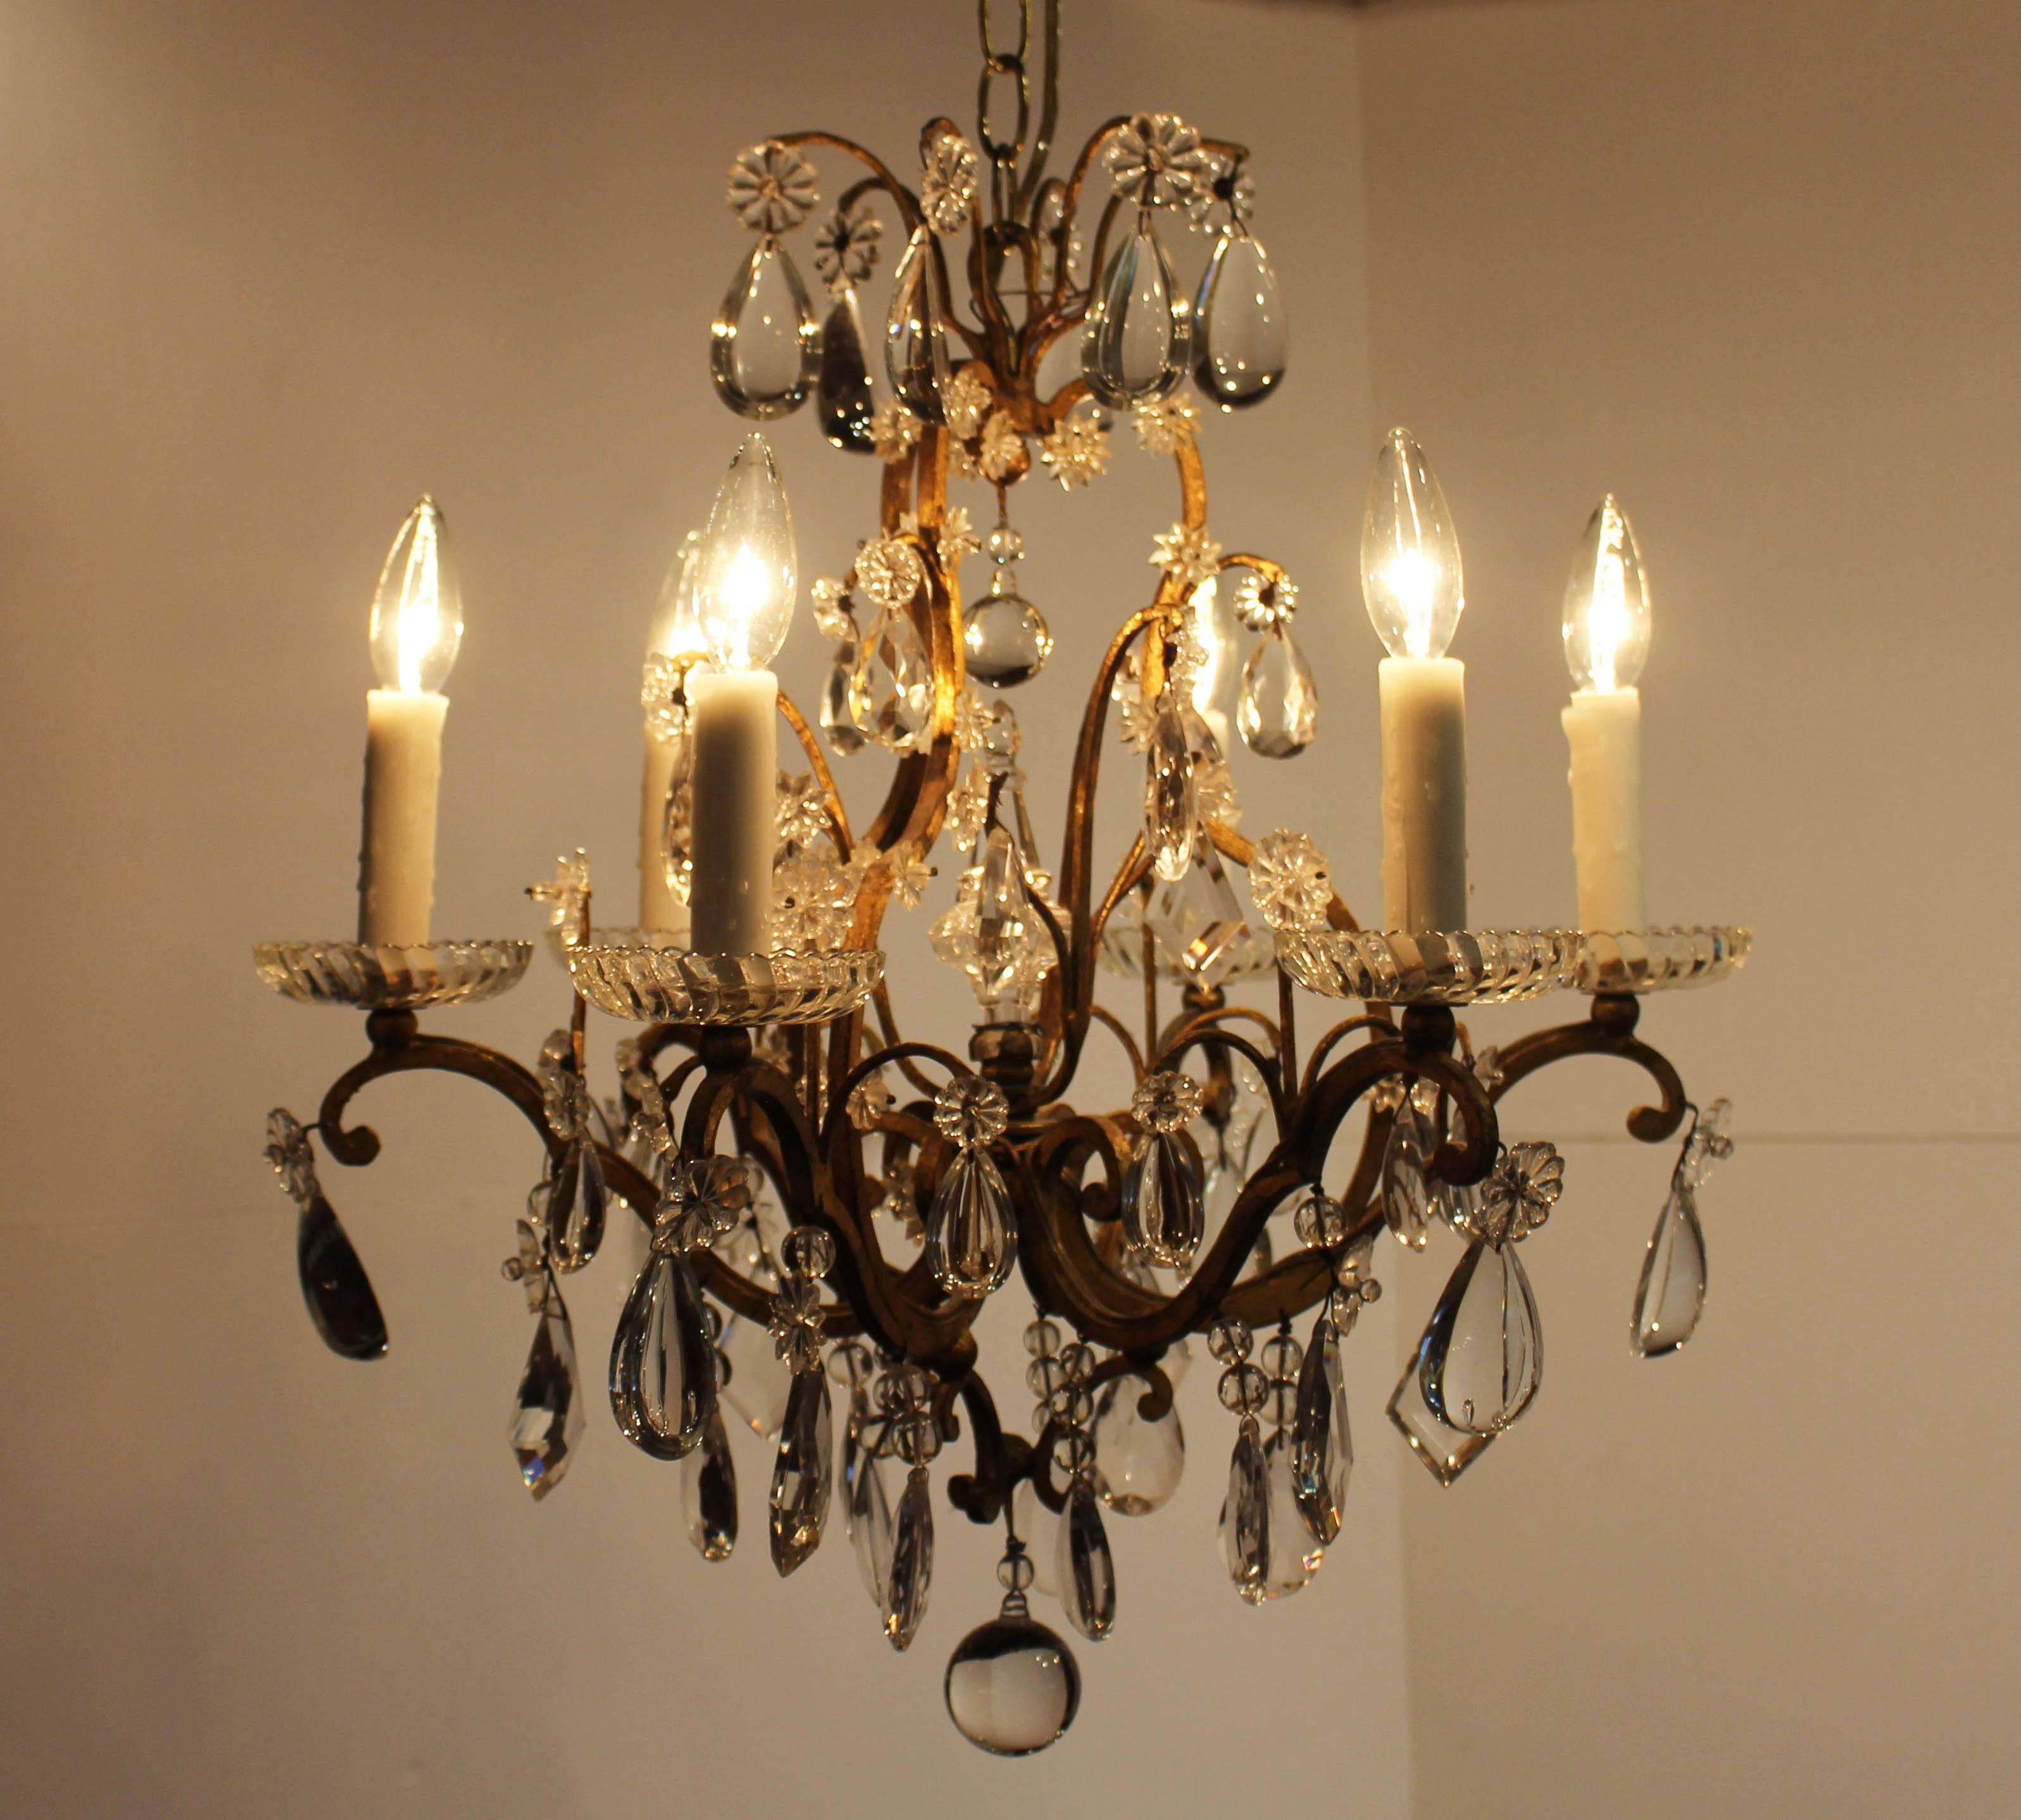 Circa 1900, Louis XV style, 6-light gilt iron & crystal chandelier, French. Very good quality, S & C scrolled iron work with abundant tear-drop, faceted diamond, and ball drops accented with rosettes & beads. Panel swirled bobeches. 

Founded by